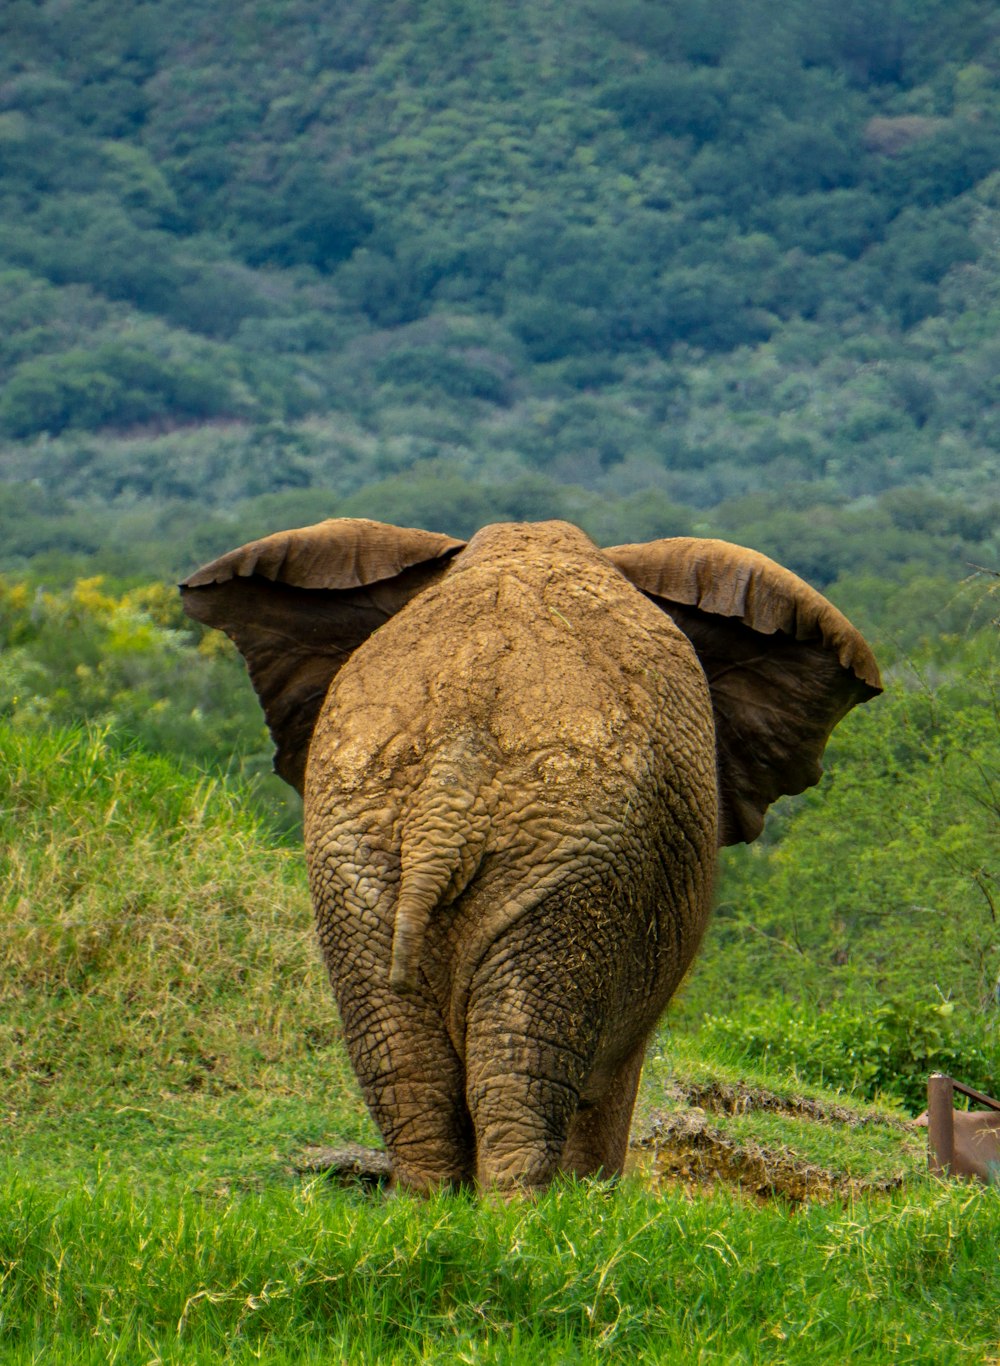 an elephant walking in a grassy field with mountains in the background